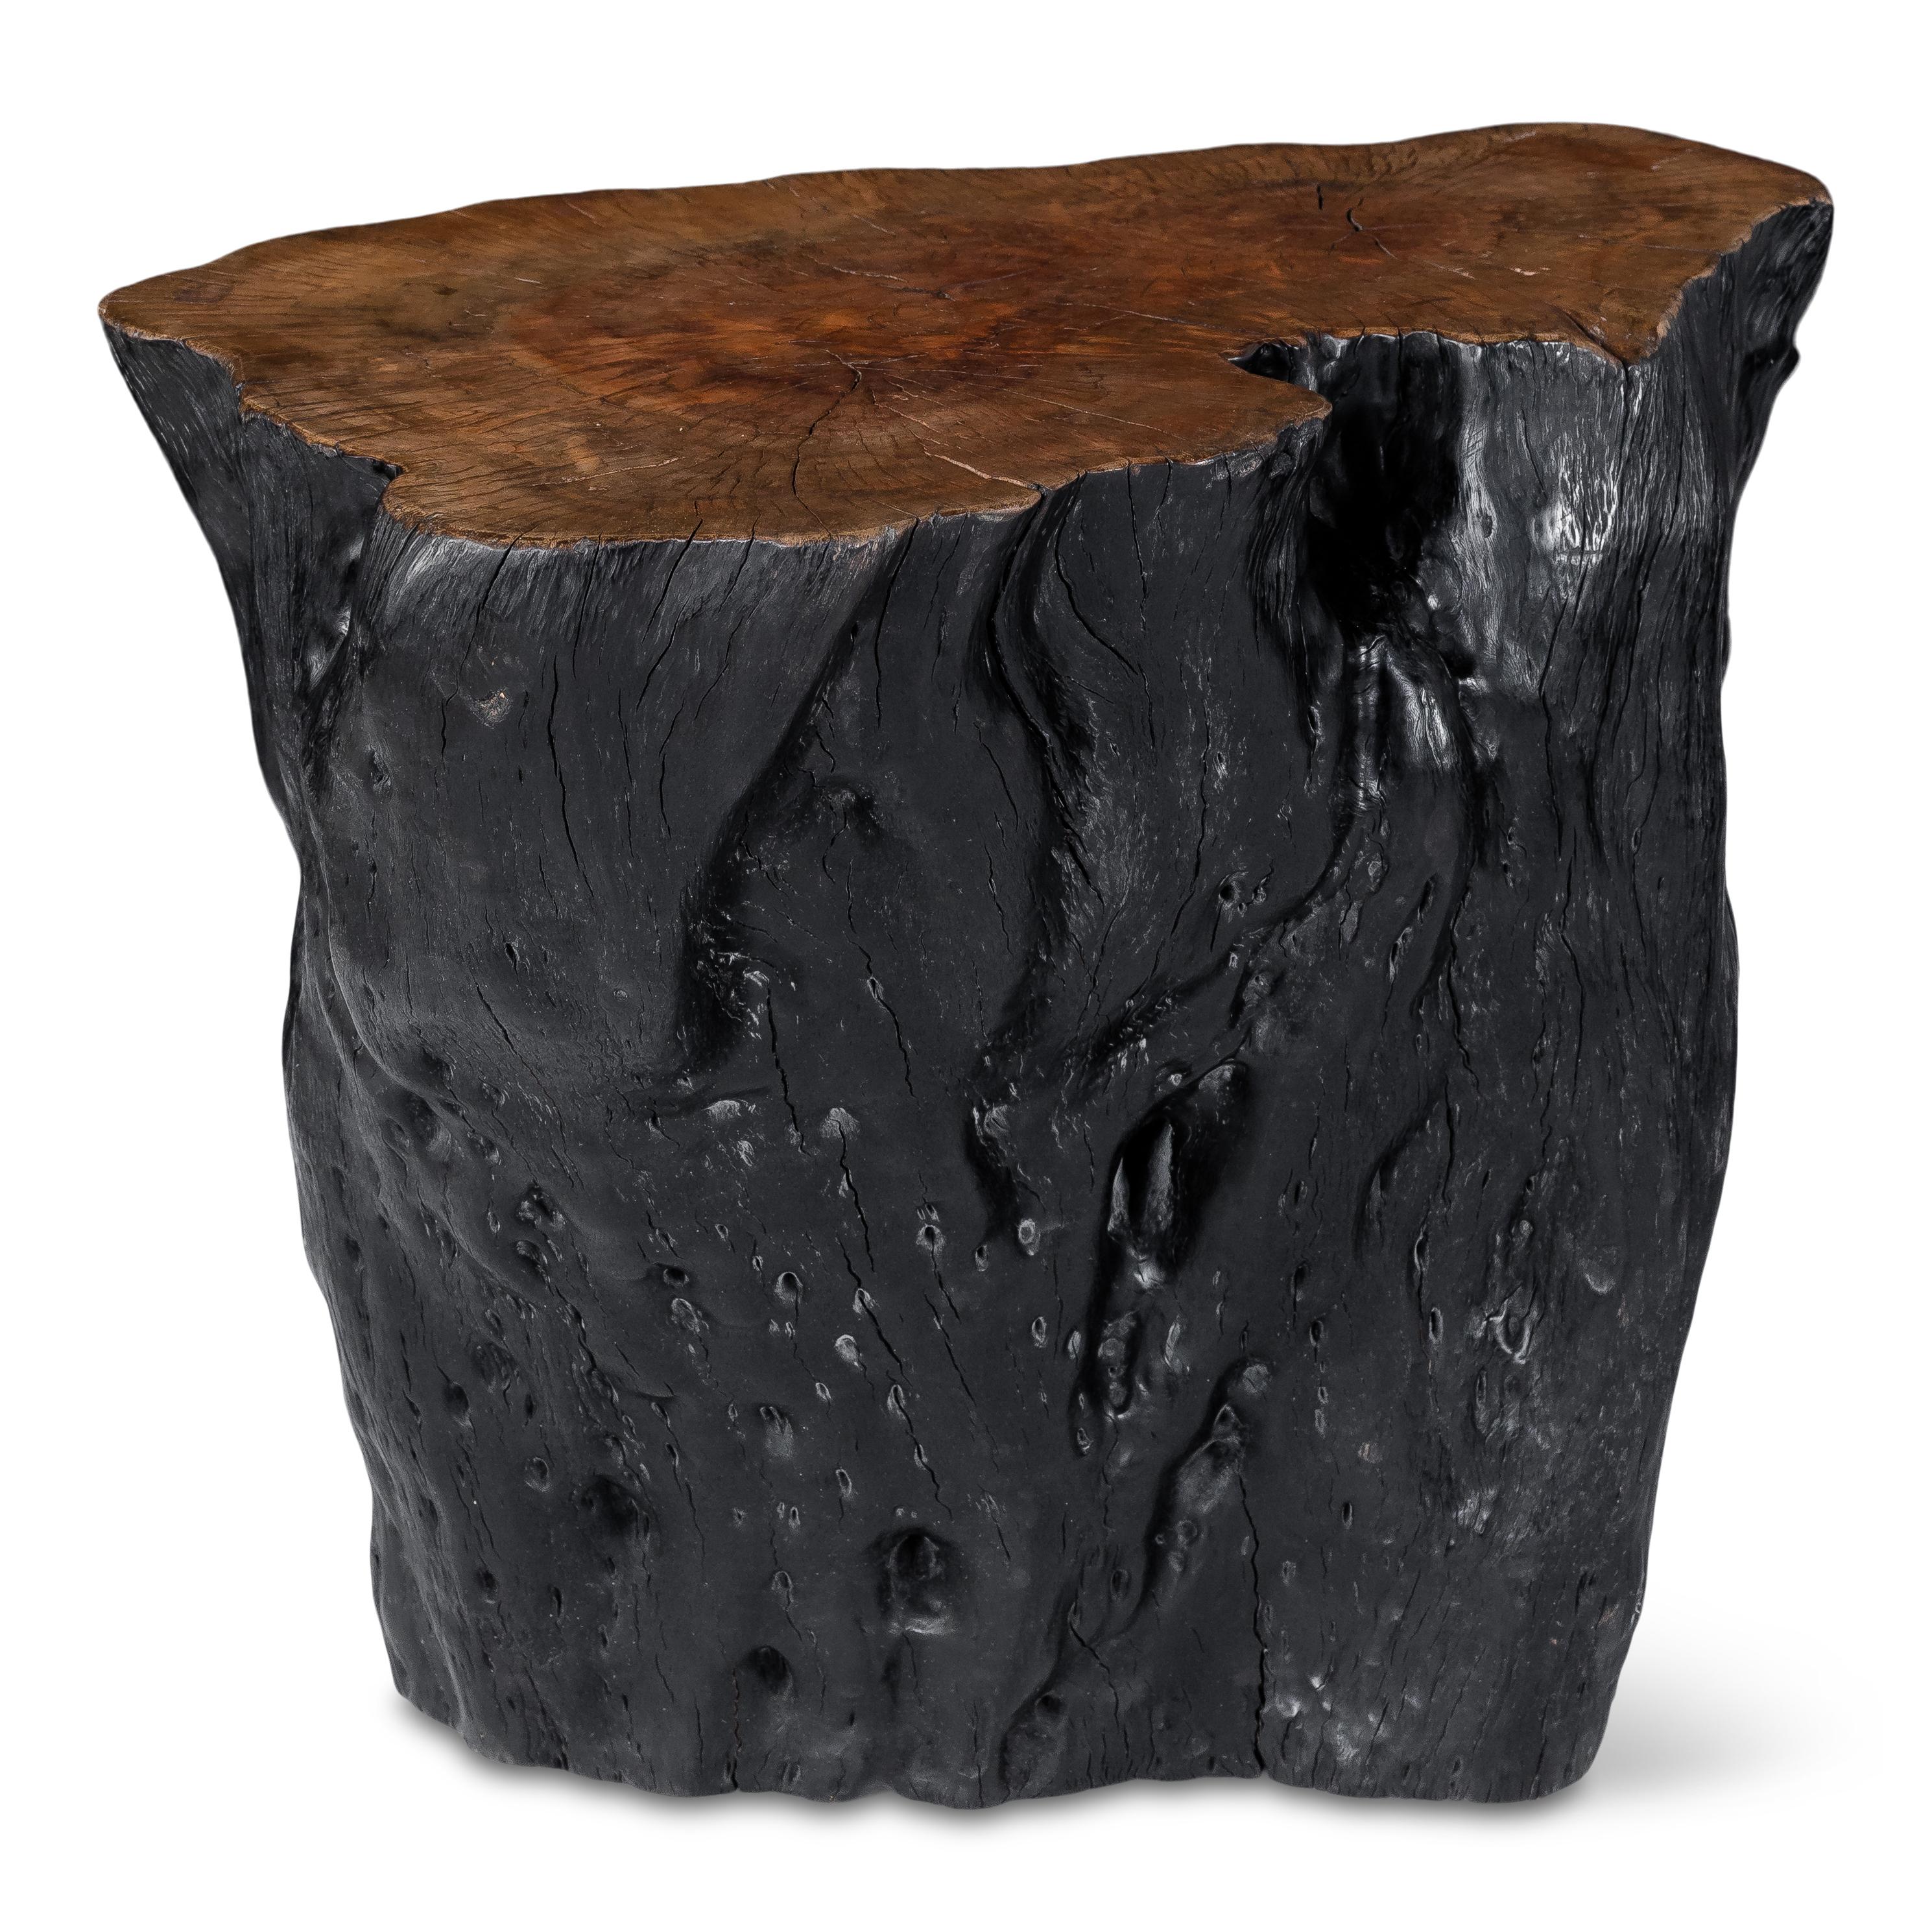 Lychee wood stump end table.

 This piece is a part of Brendan Bass’s one-of-a-kind collection, Le Monde. French for “The World”, the Le Monde collection is made up of rare and hard to find pieces curated by Brendan from estate sales, brocantes, and